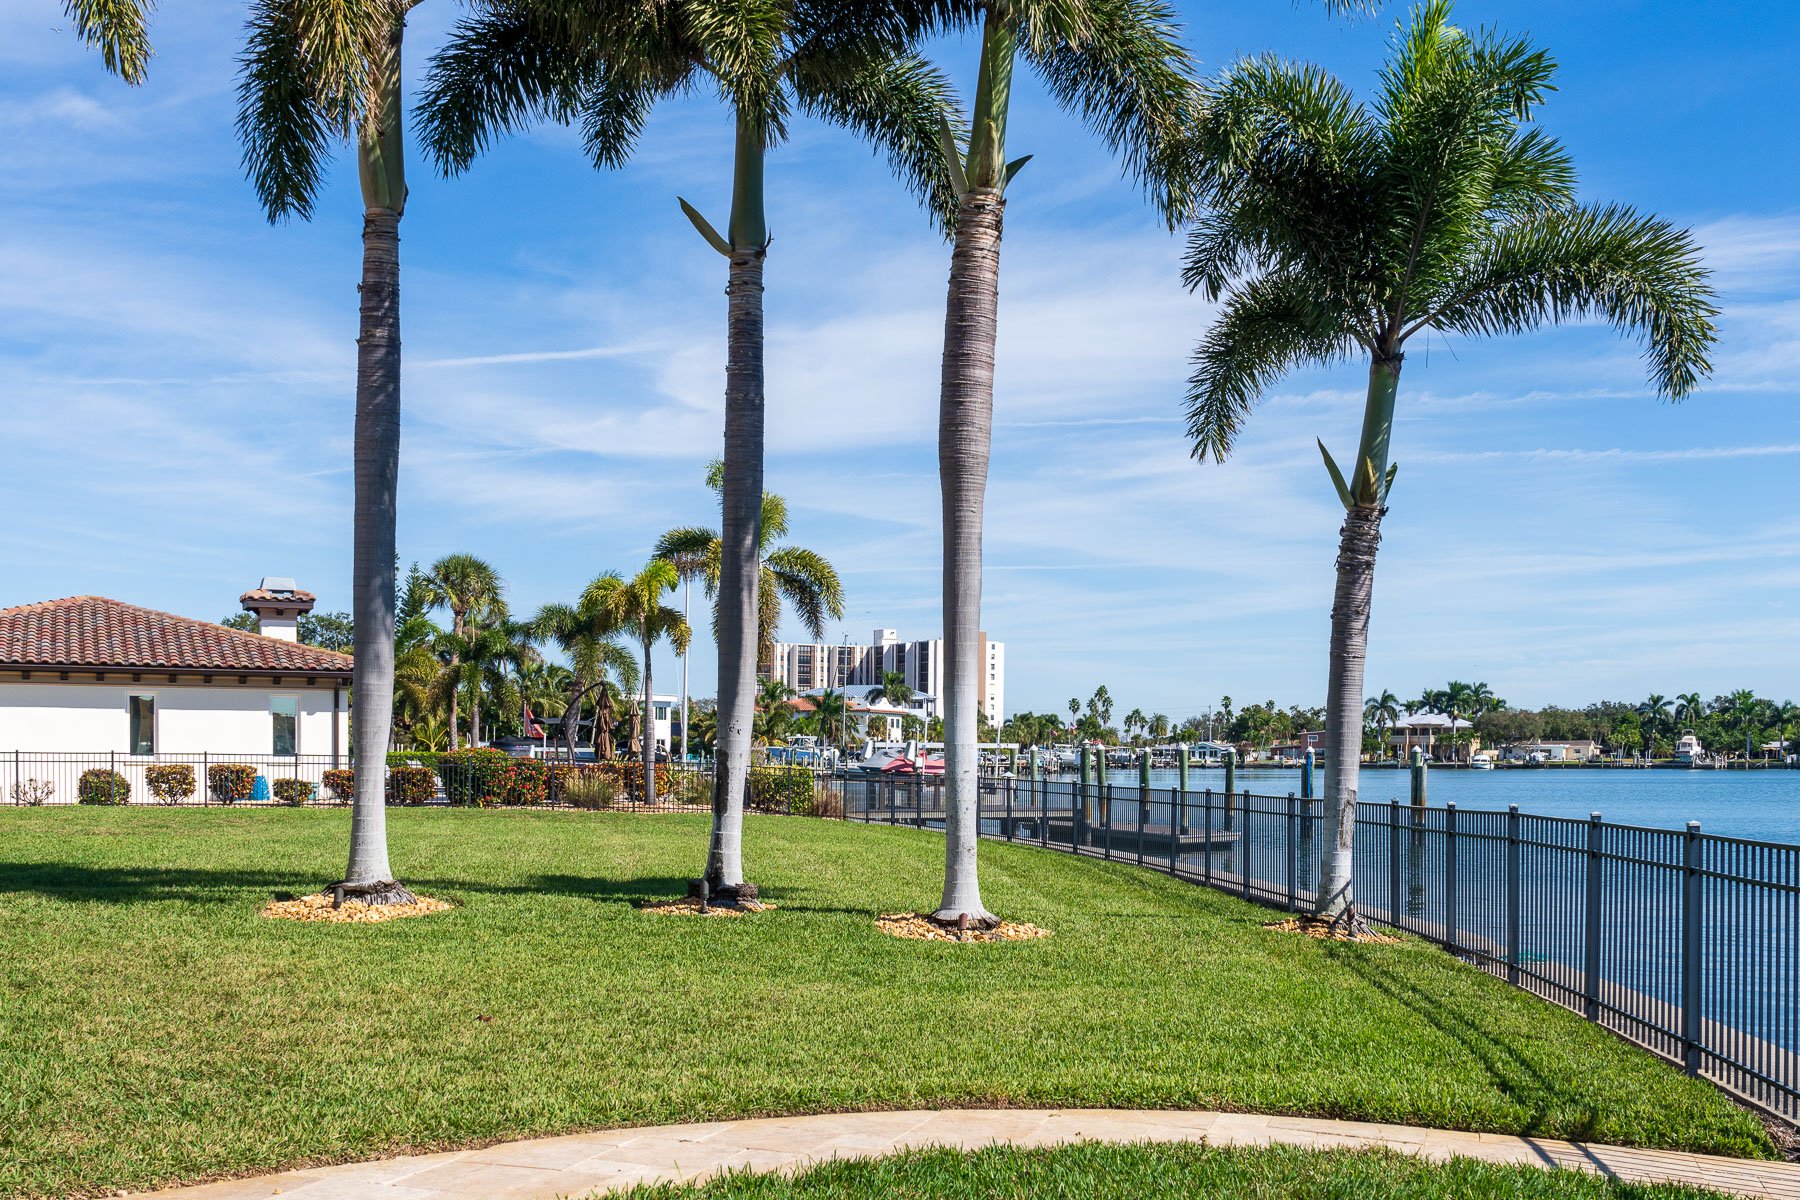 landscape maintenance near water with large palm trees